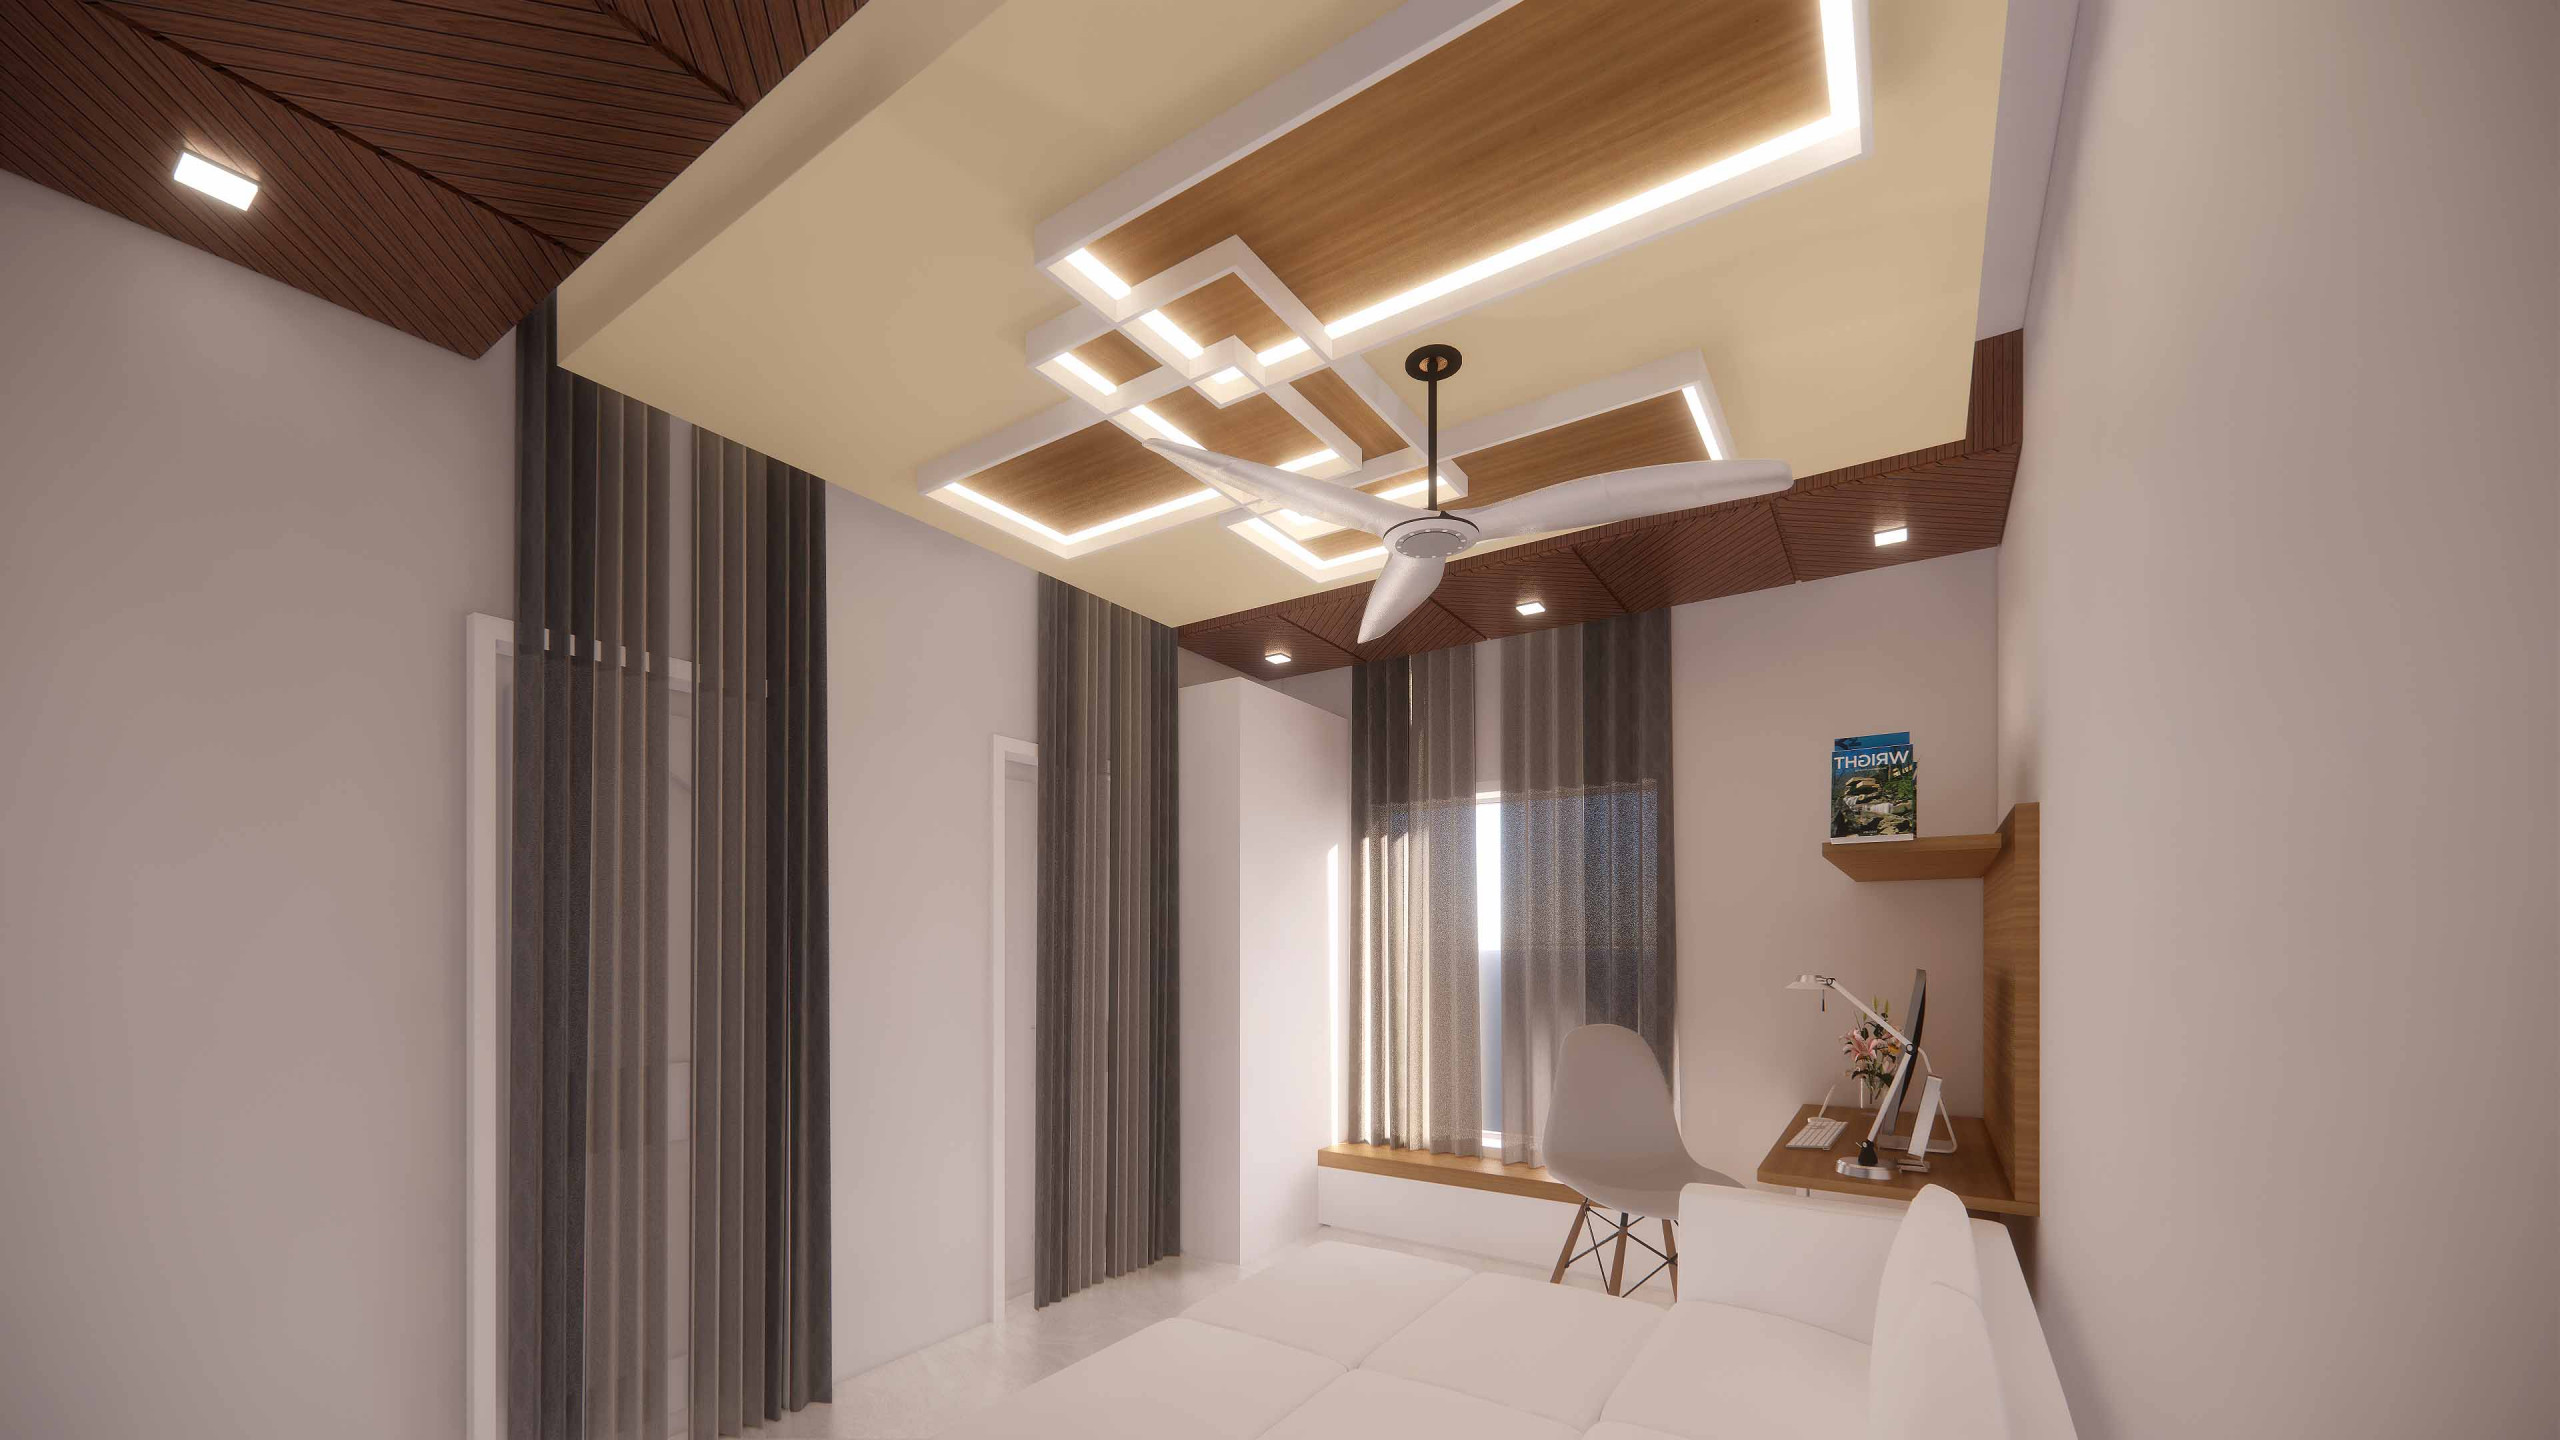 Professional Gypsum Ceiling and Gypsum Partition works Company Ajman – UAE  Classifieds